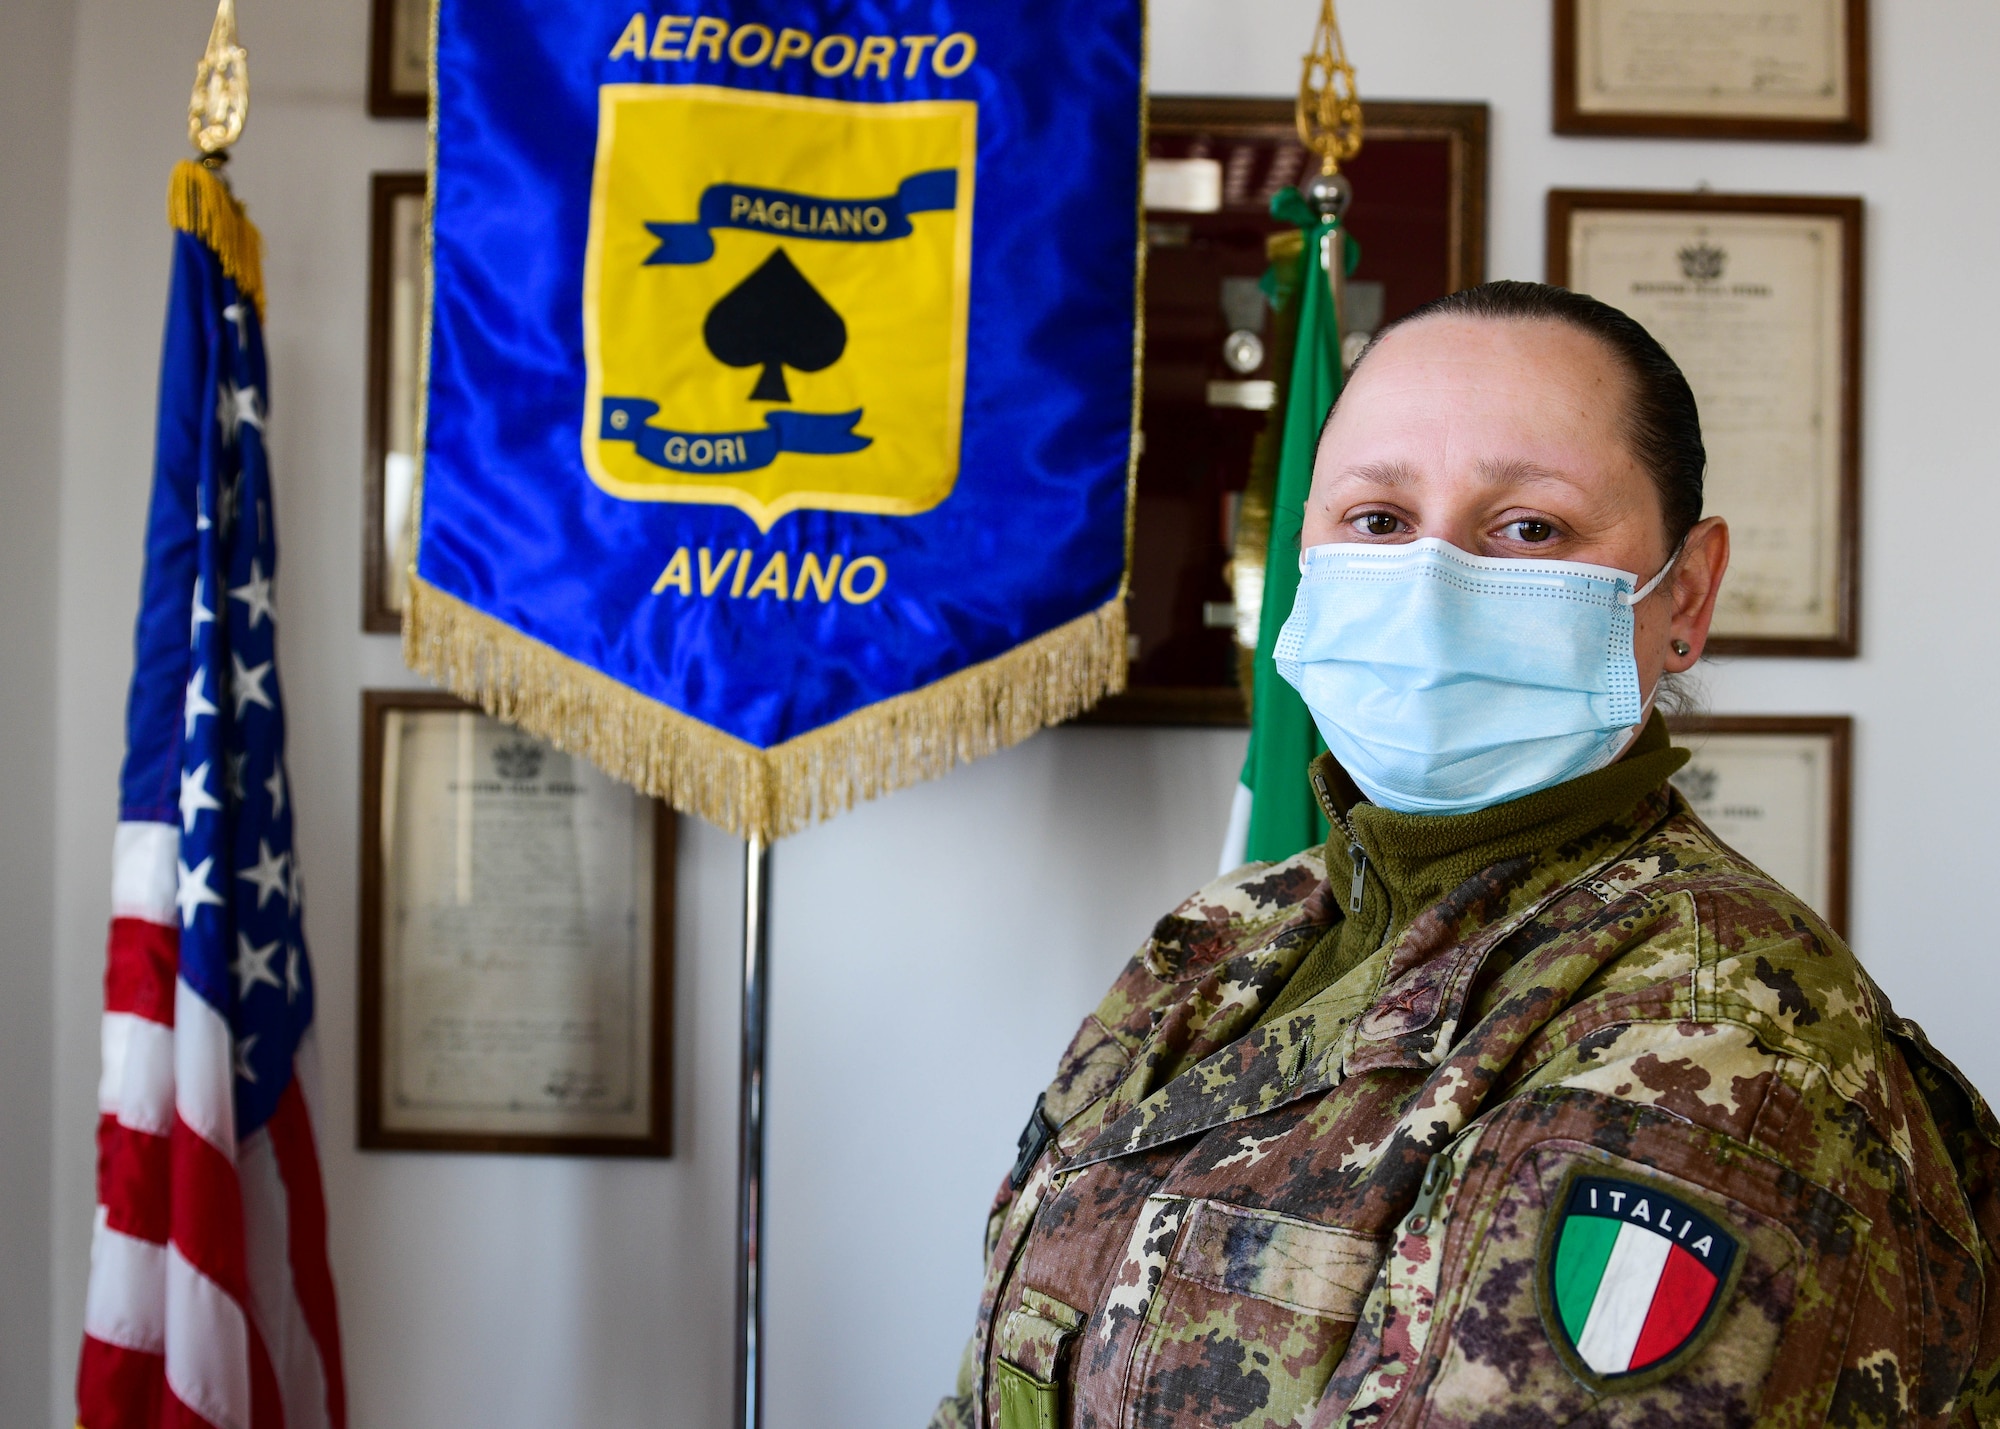 Italian air force Chief Master Sgt. Chiara Melchionno, Italian air force Base Operations Center operator, poses for a photo at Aviano Air Base, Italy, March 10, 2022. Women’s History Month highlights the accomplishments and contributions of women to events in history and contemporary society. The BOC is the focal point for Aviano because they track operations that happen within the base. (U.S. Air Force photo by Senior Airman Brooke Moeder)